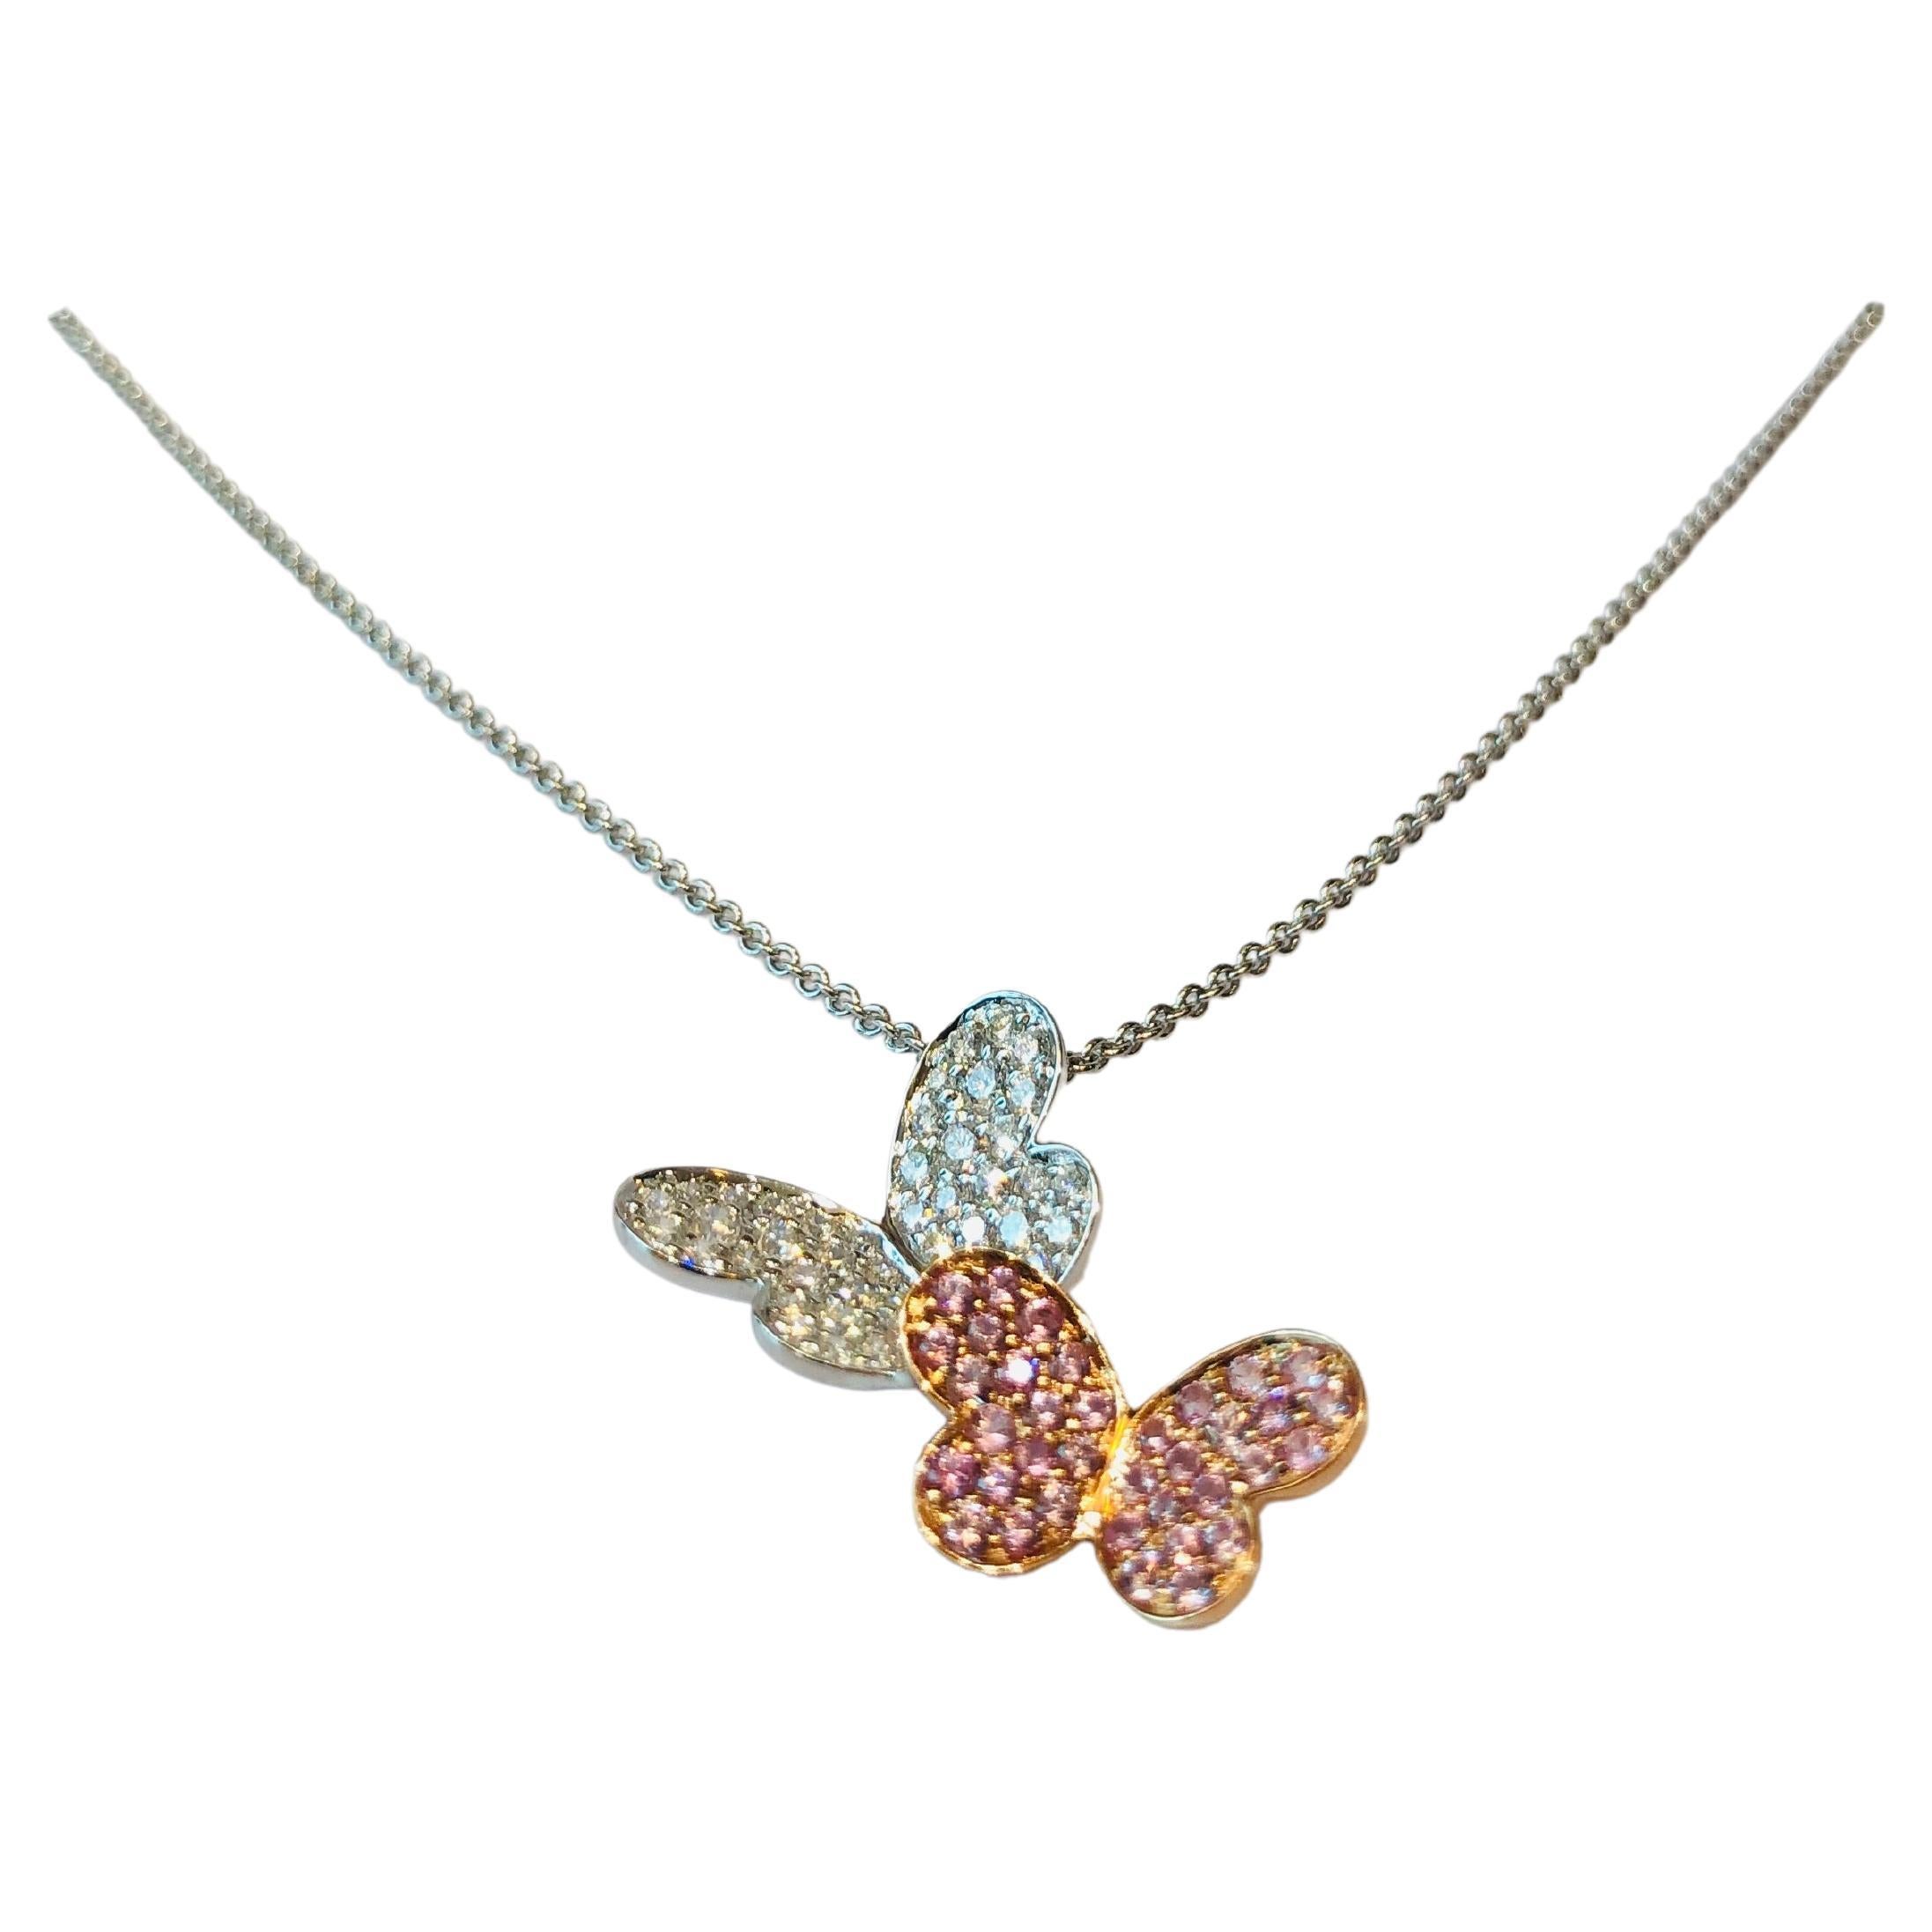  Sapphires and Diamonds Butterflies Parure Necklace, Earrings, Ring 18k Gold